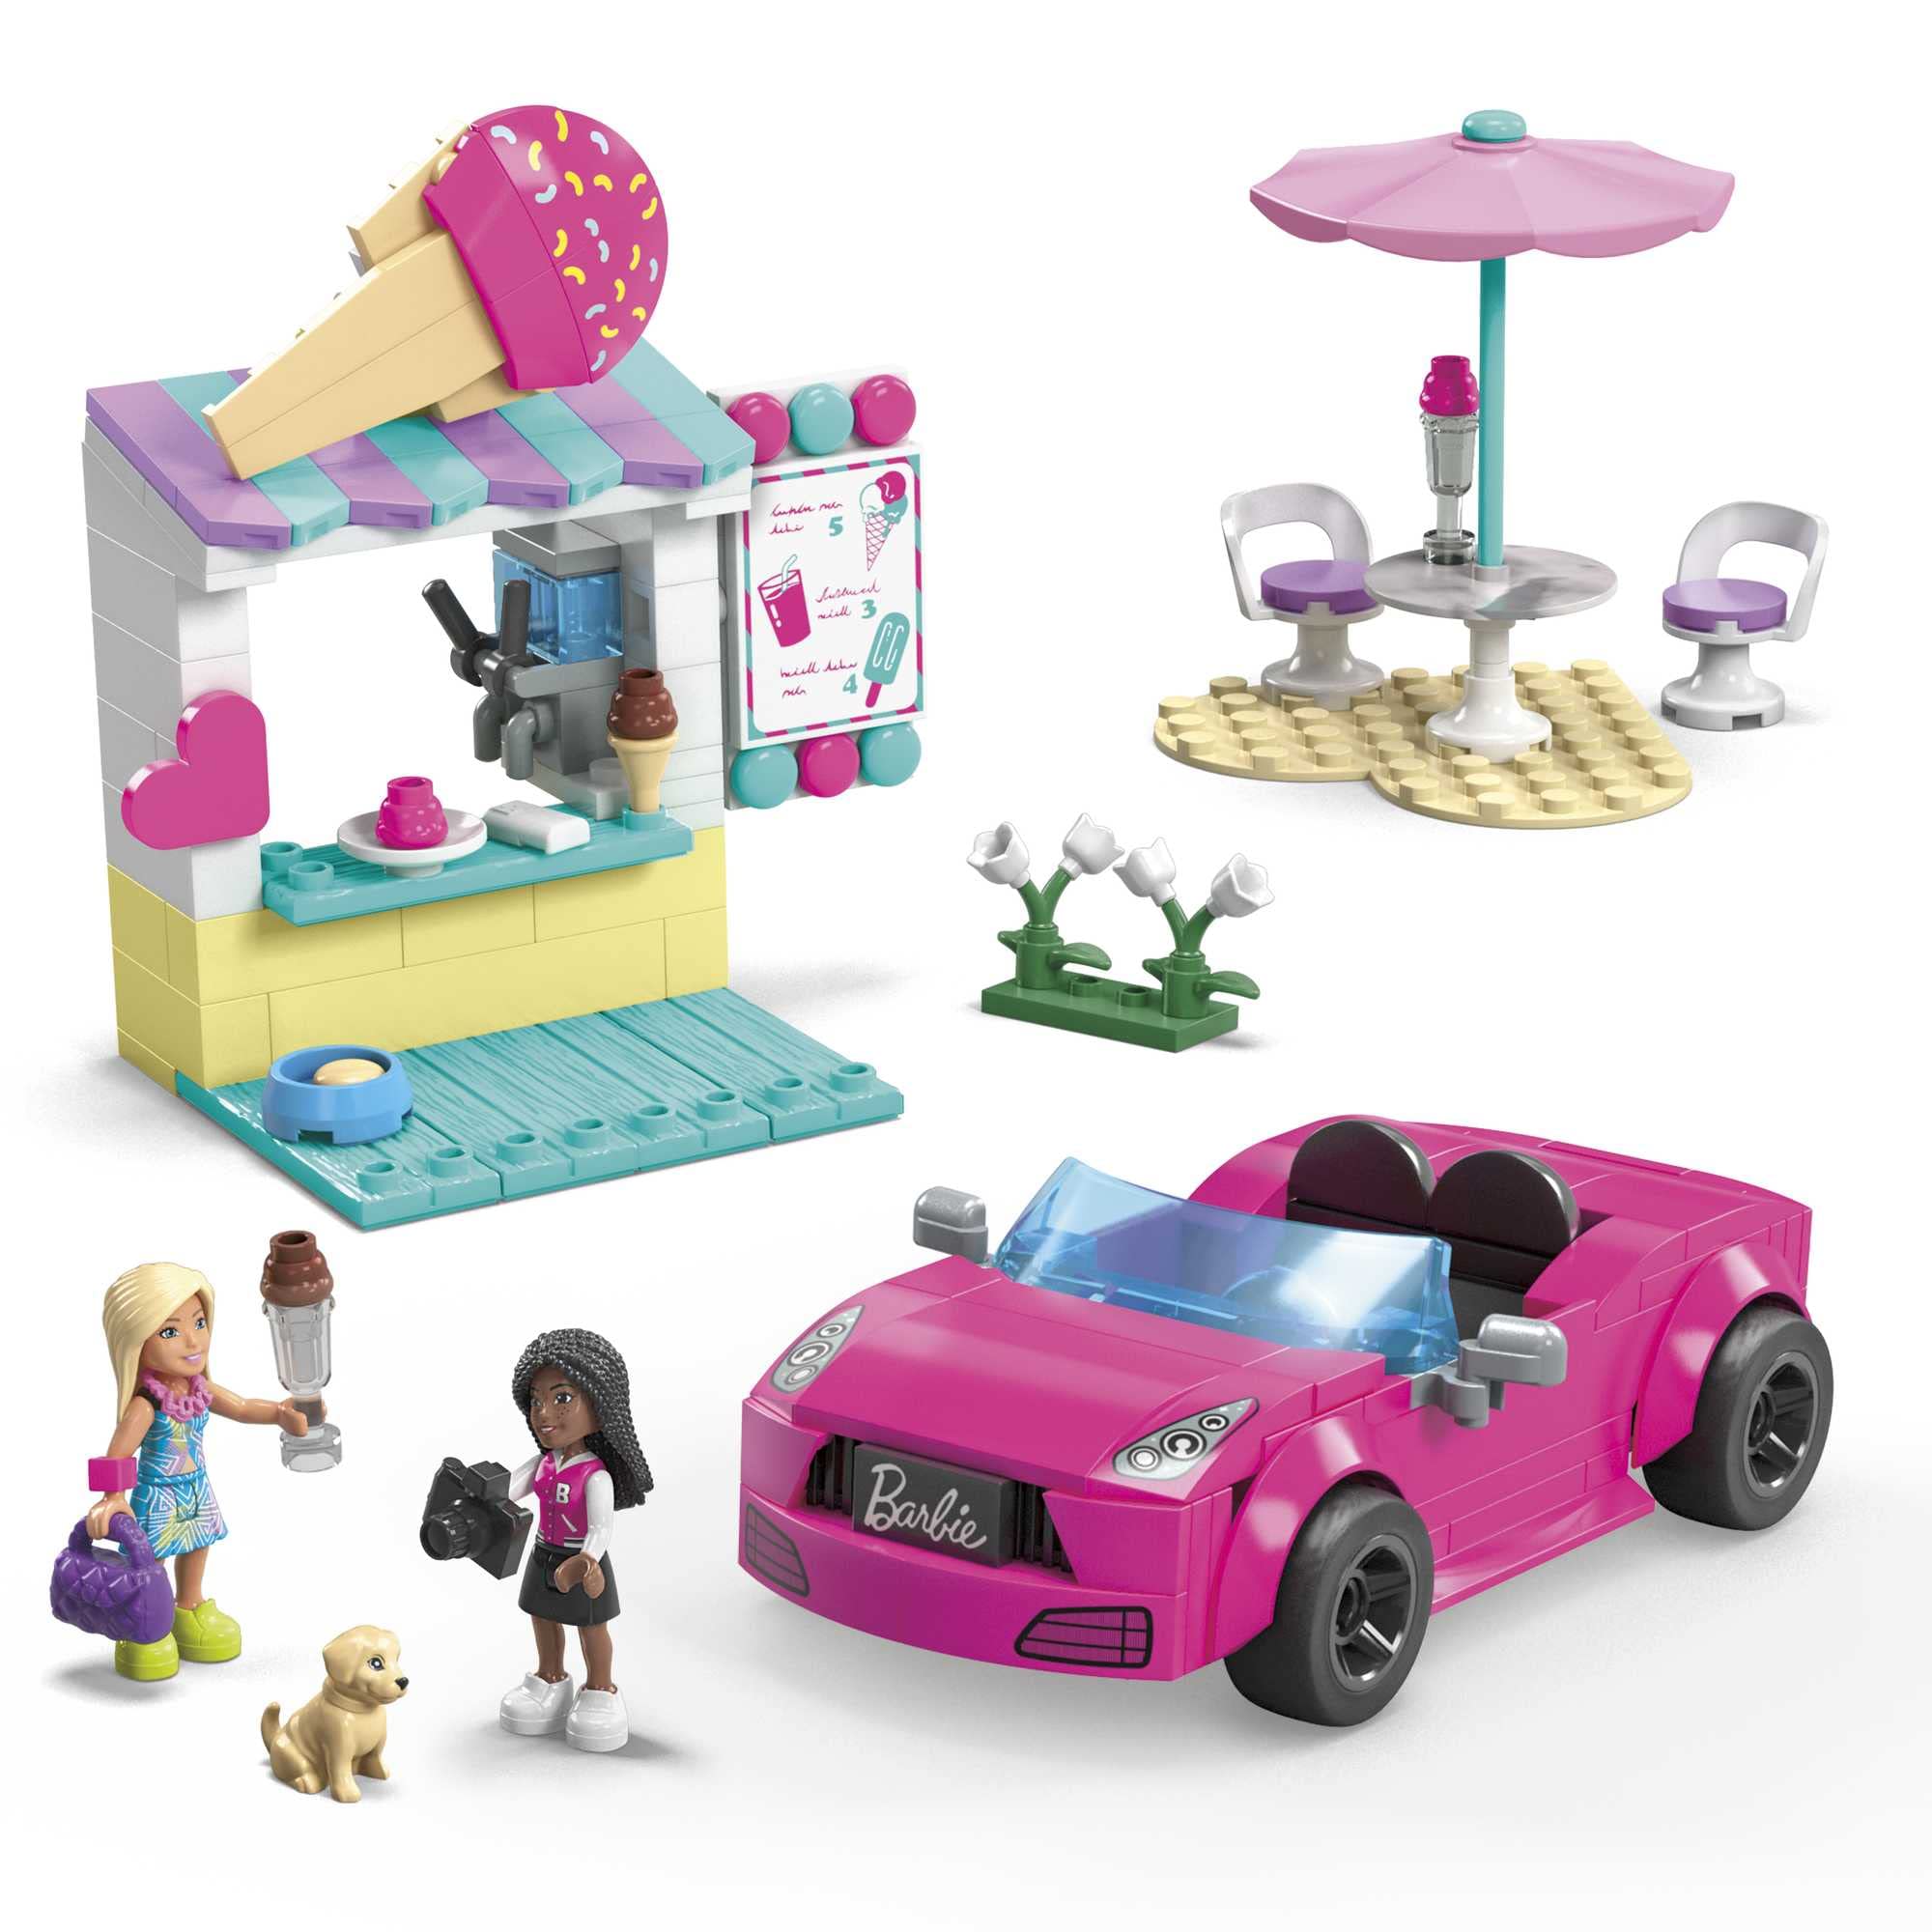 Barbie MEGA Barbie Car Building Toys Playset, Convertible & Ice Cream Stand With 225 Pieces, 2 Micro-Dolls and Accessories, Pink, Gift Ideas For Kids